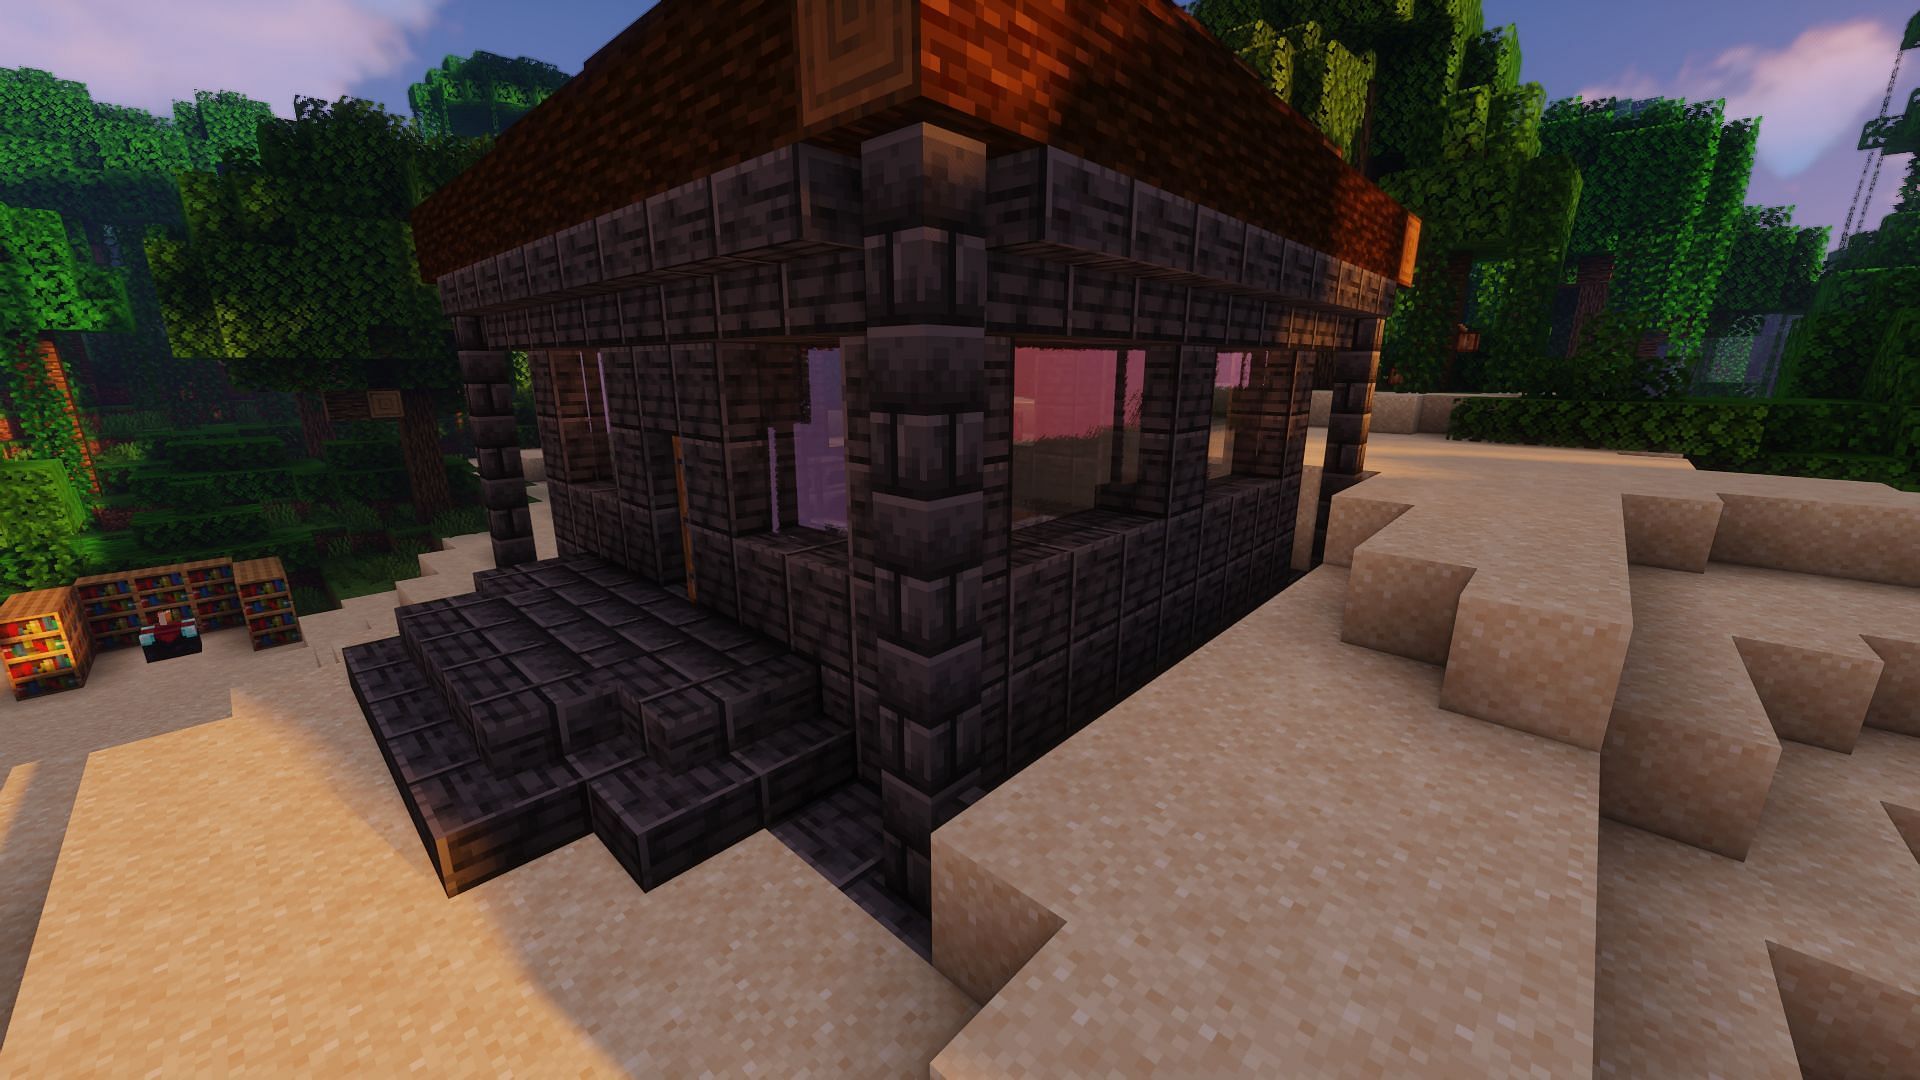 Walls adding depth and excitement to the corner of a build (Image via Minecraft)